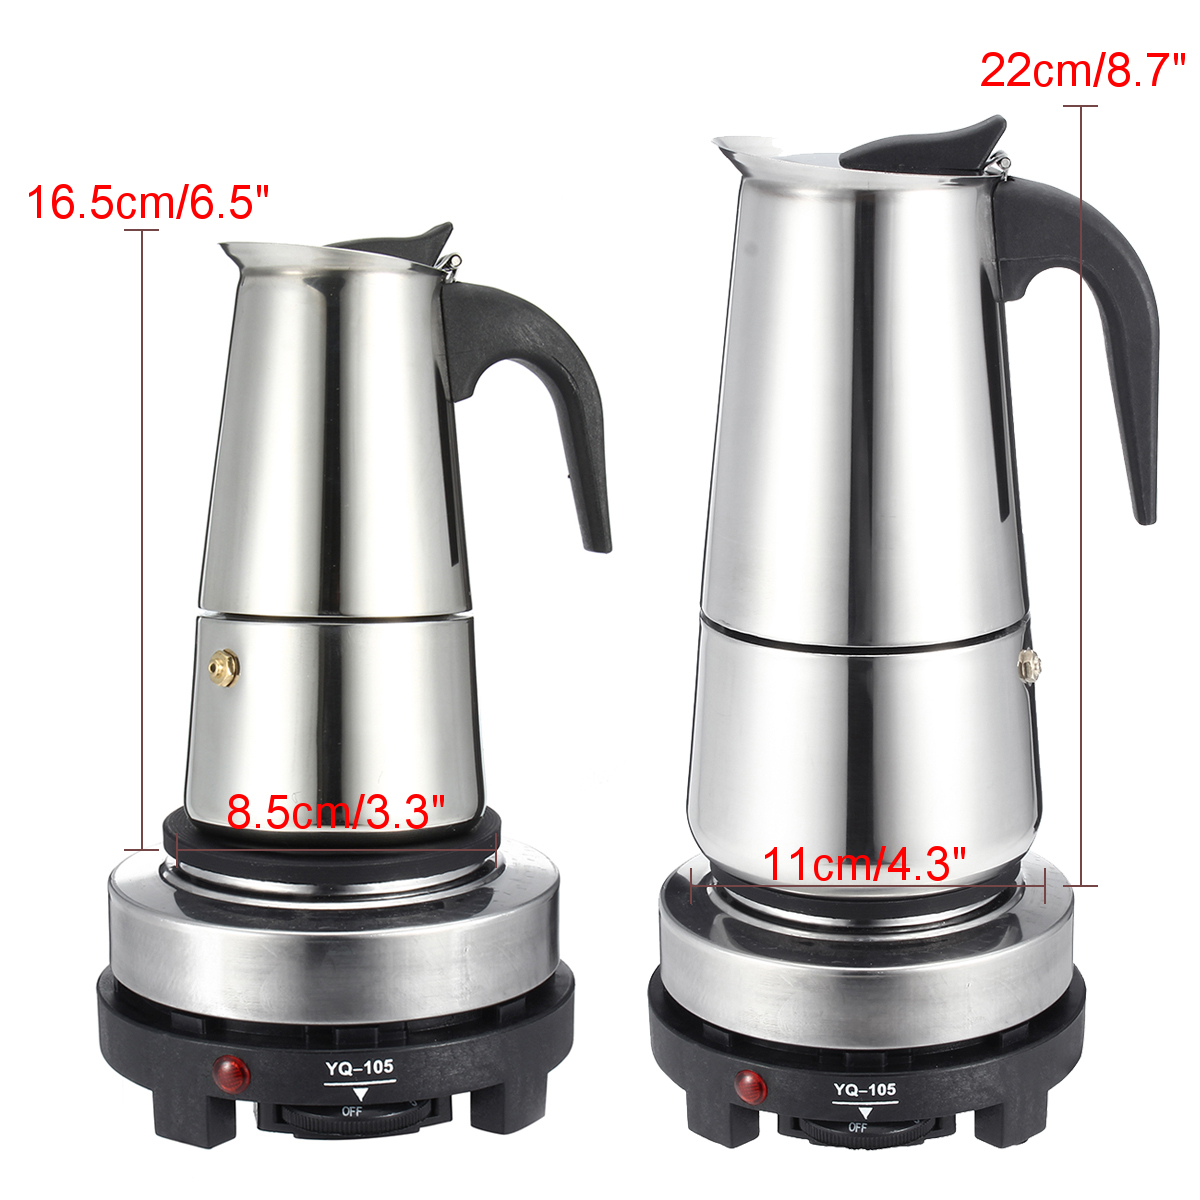 Espresso Moka Coffee Maker Pot Percolator Stainless Steel Electric Stove Electric Coffee Kettle 11